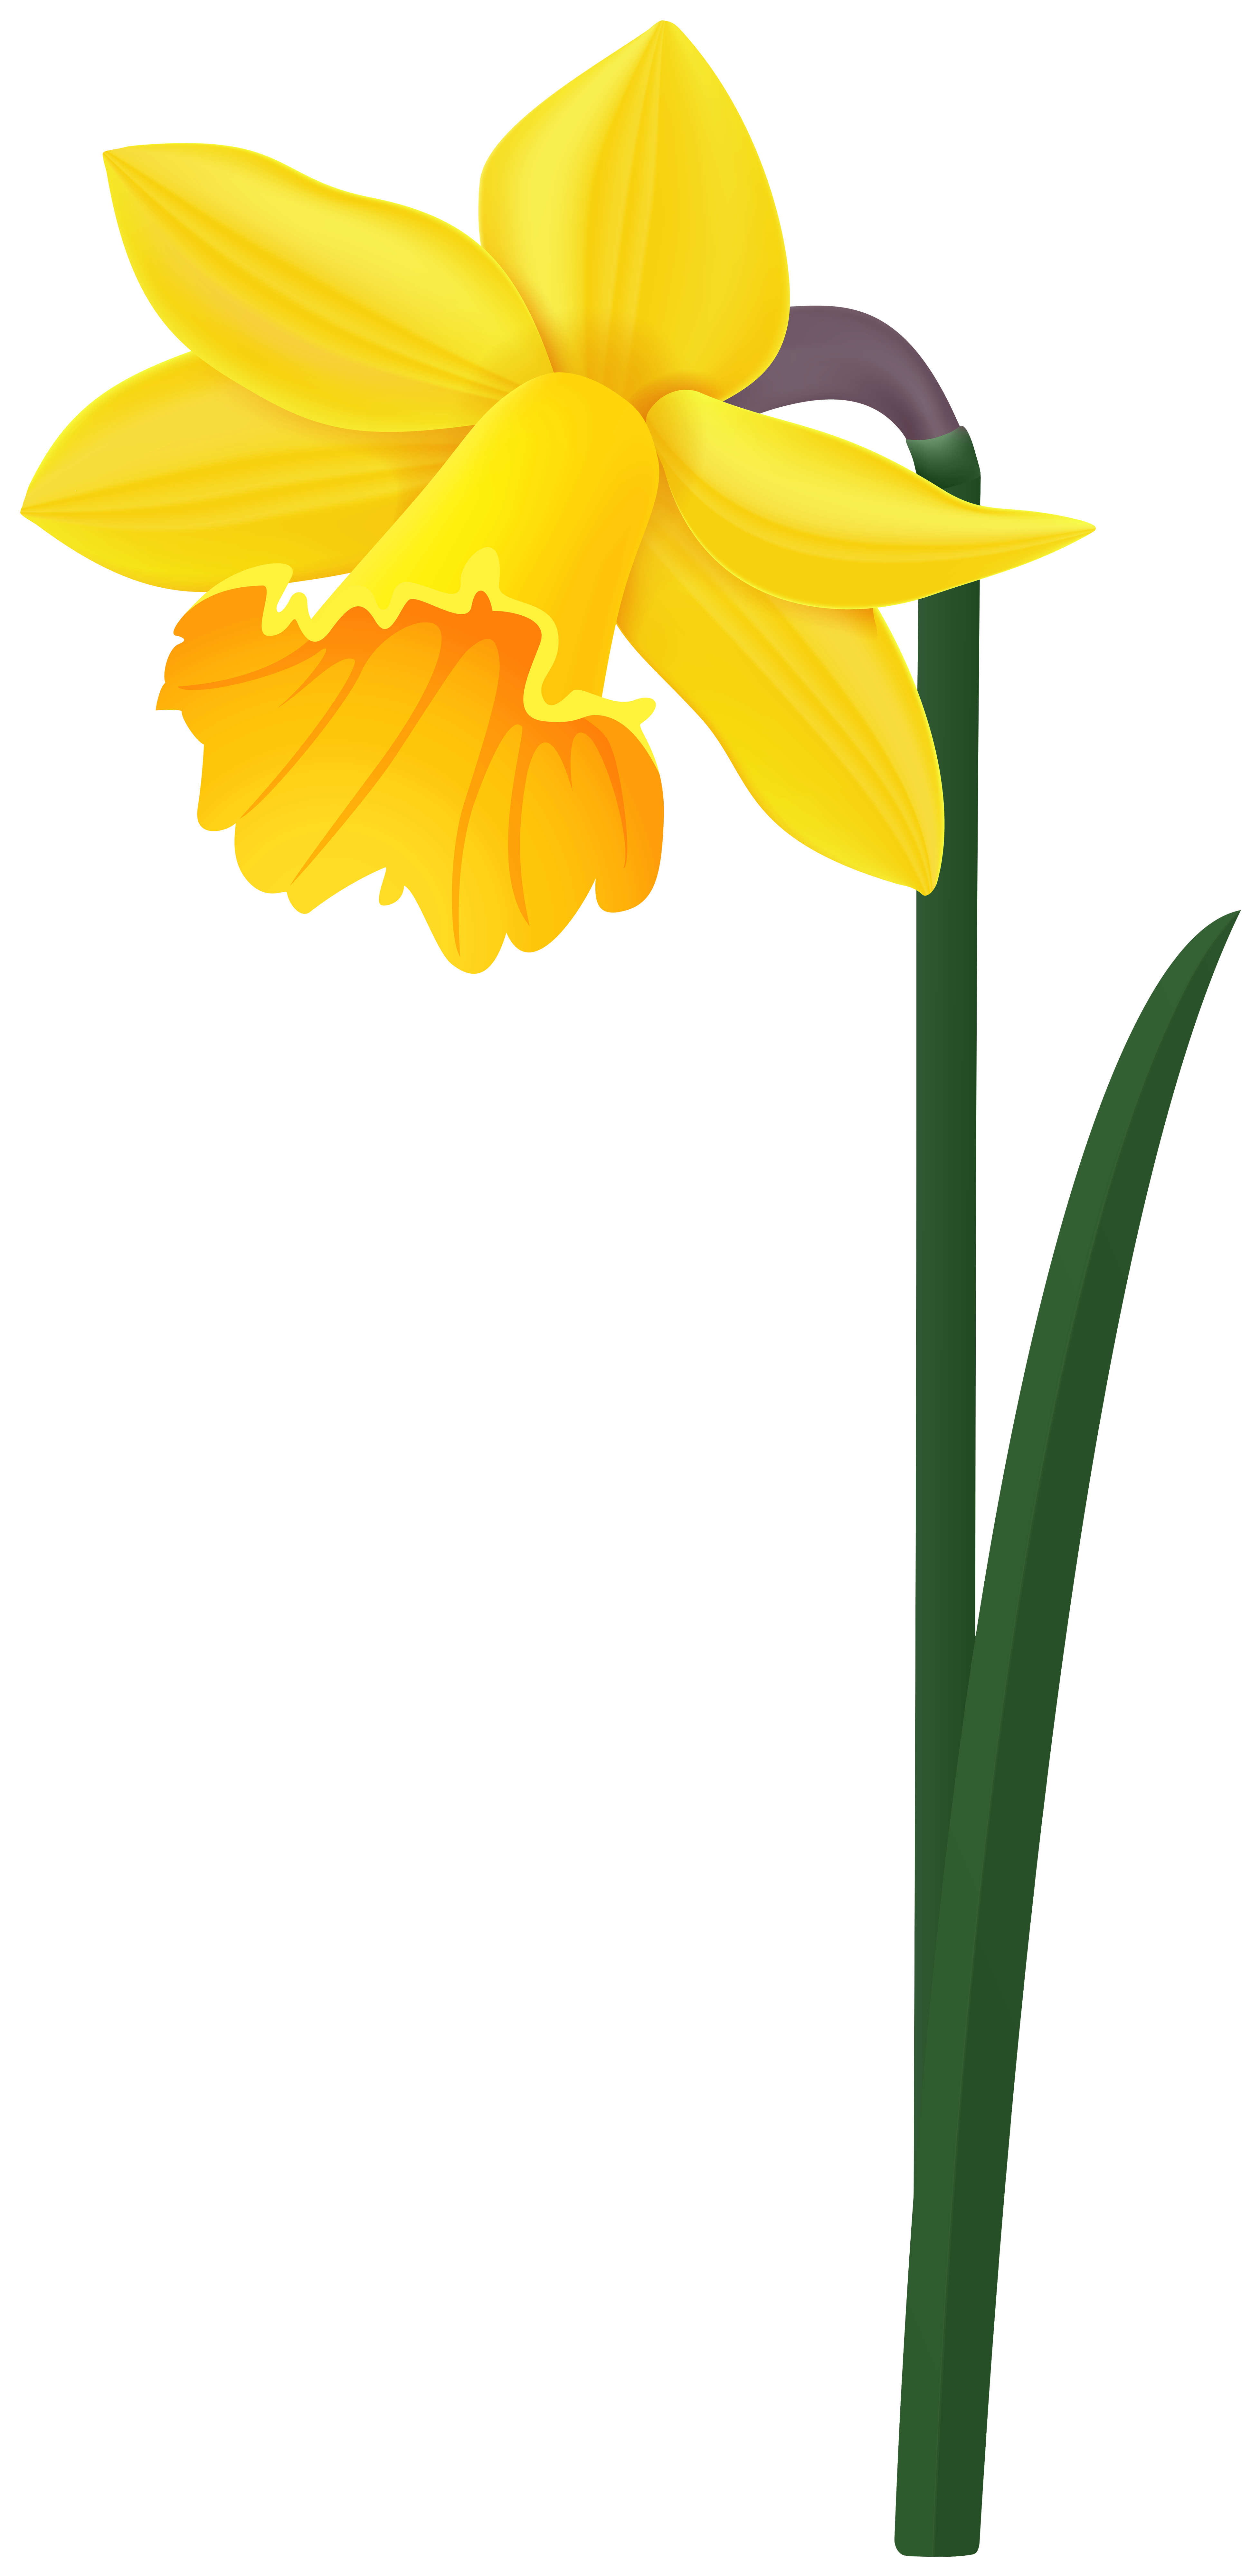 daffodil yellow flower png image gallery yopriceville high quality images and transparent png free clipart gallery yopriceville